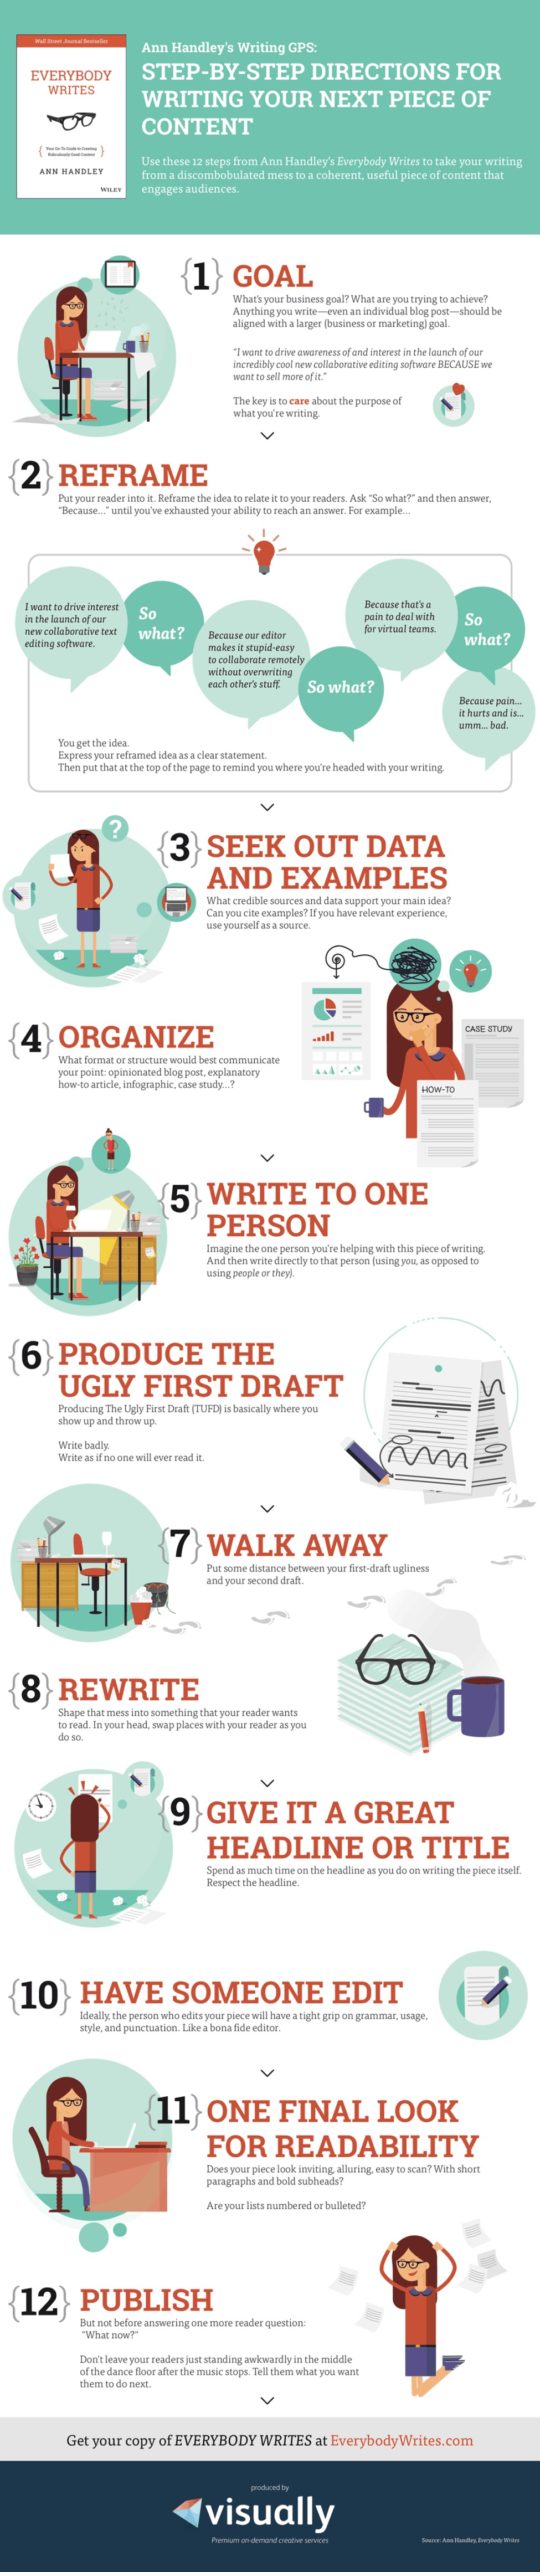 Twelve proven ways to become a better writer #infographic